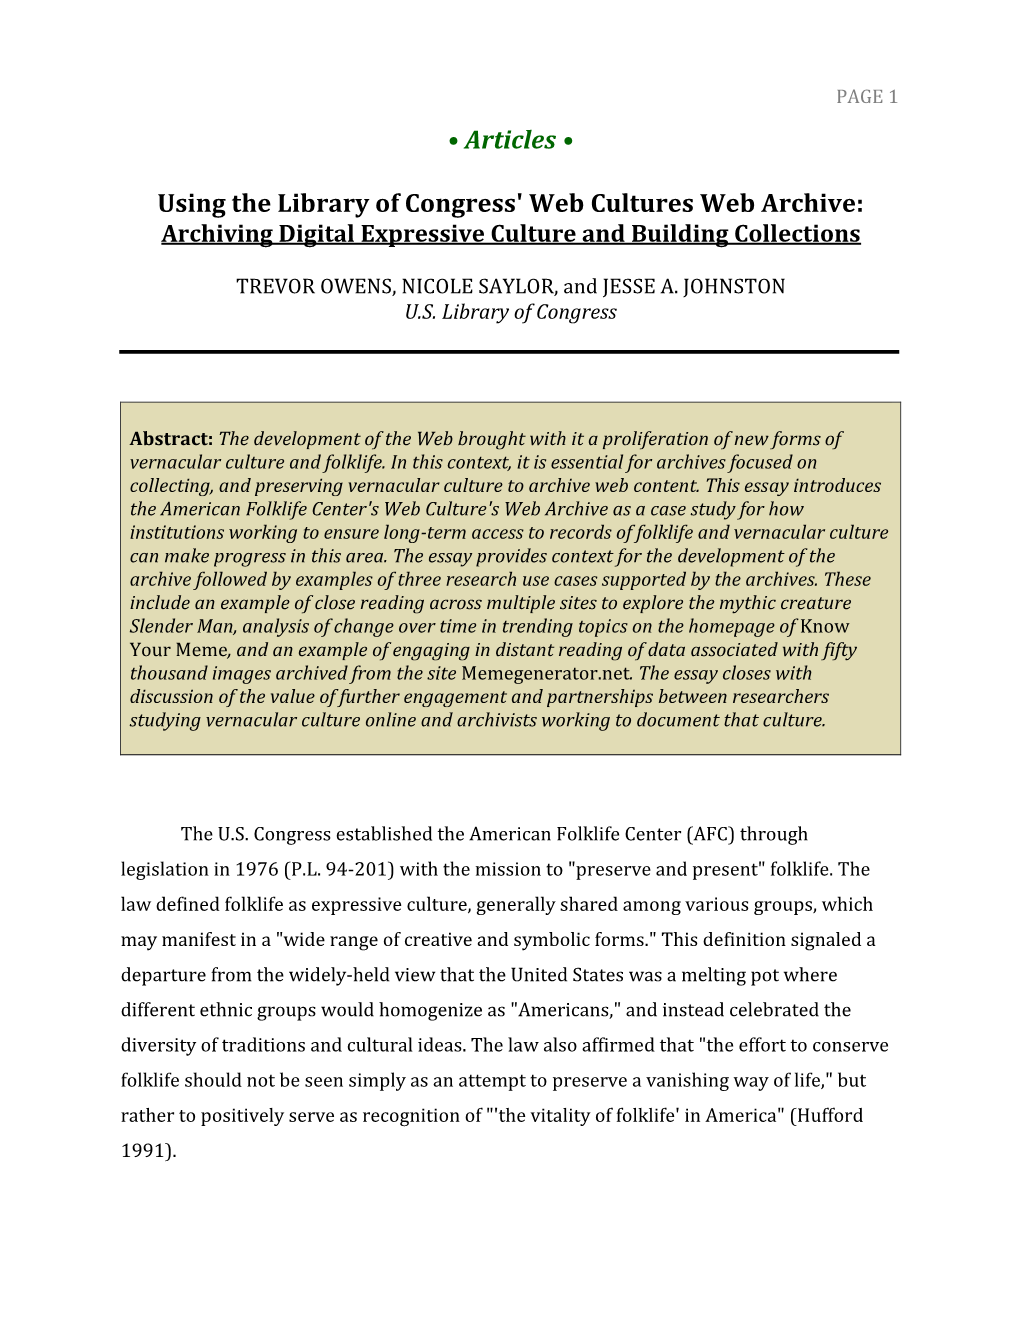 • Articles • Using the Library of Congress' Web Cultures Web